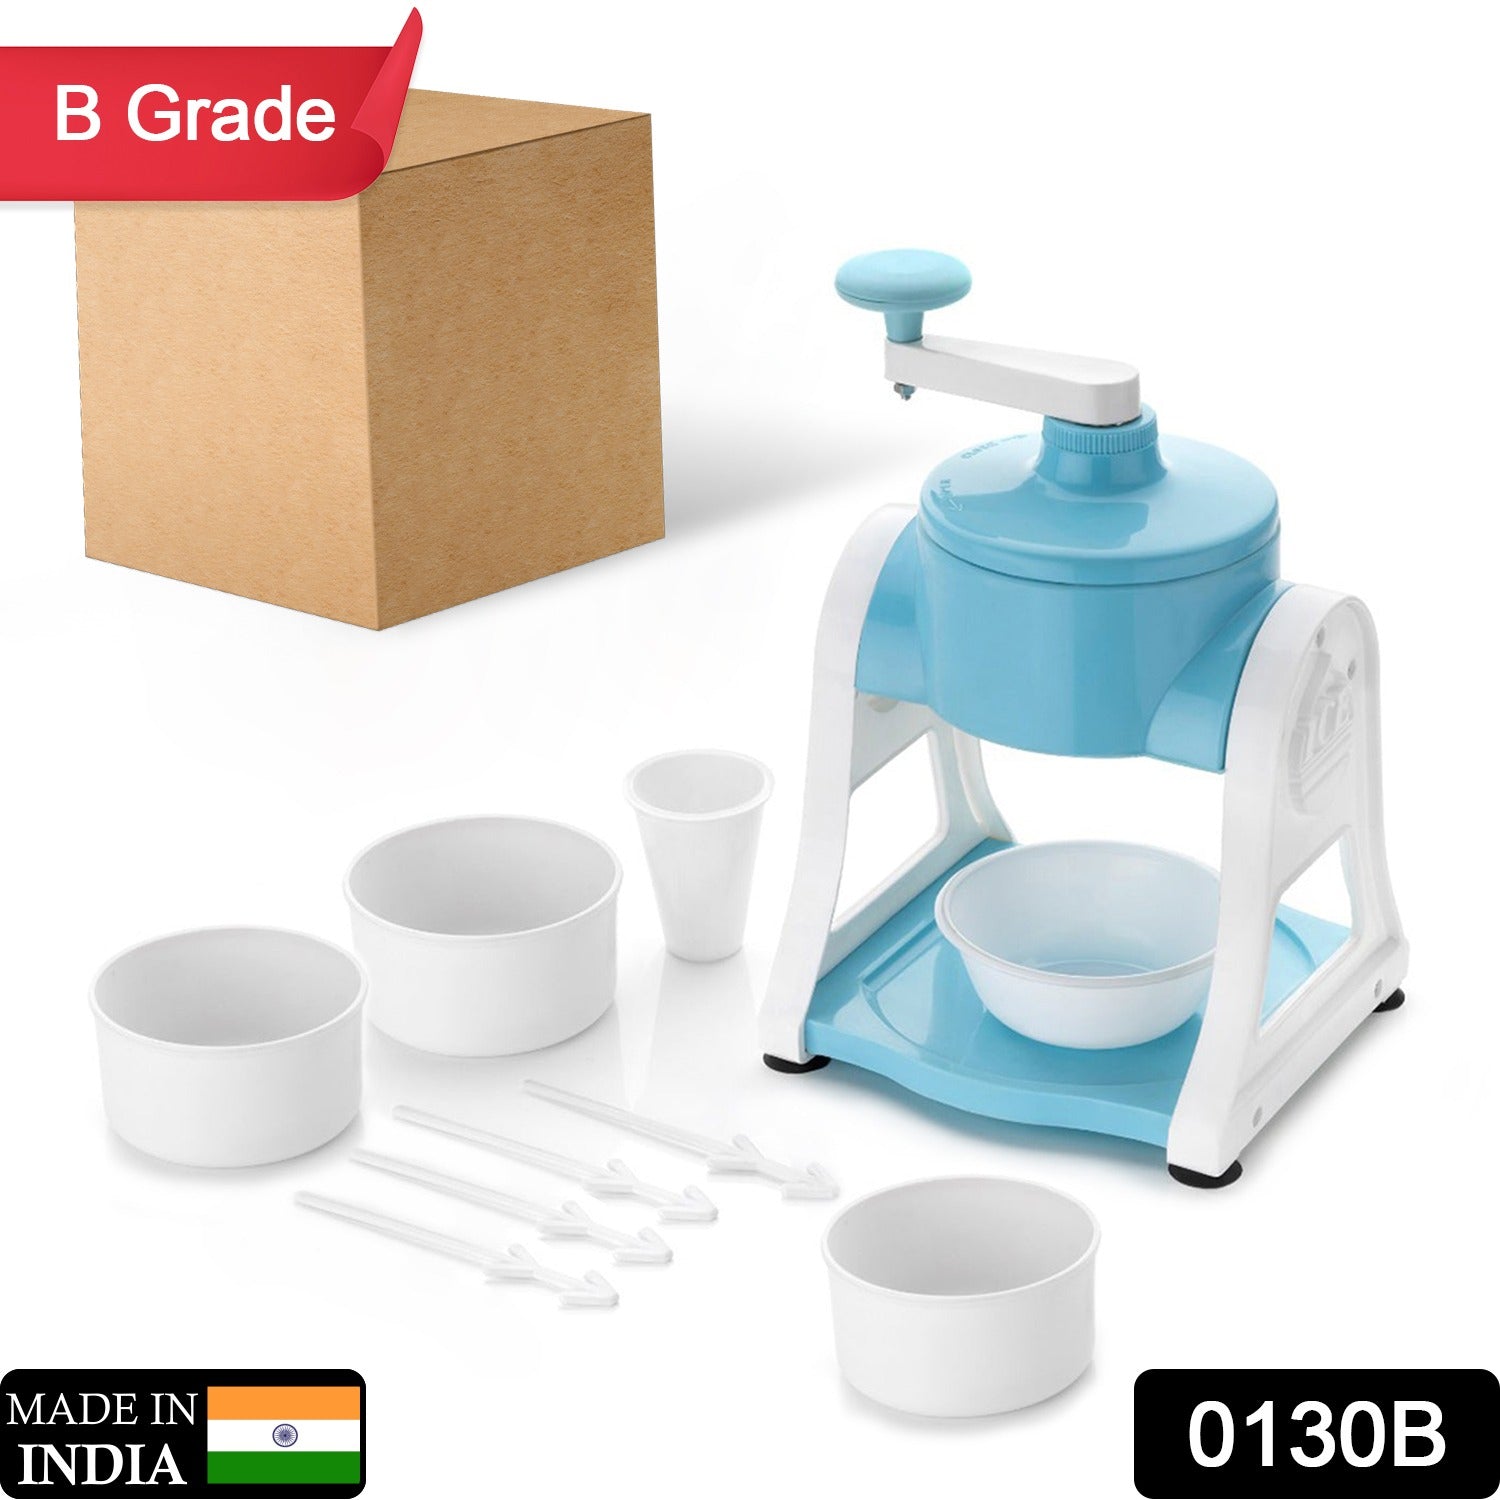 0130B  BLUE GOLA MAKER USED FOR MAKING GOLA’S IN SUMMERS AT VARIOUS KINDS OF PLACES AND ALL ( B Grade) 